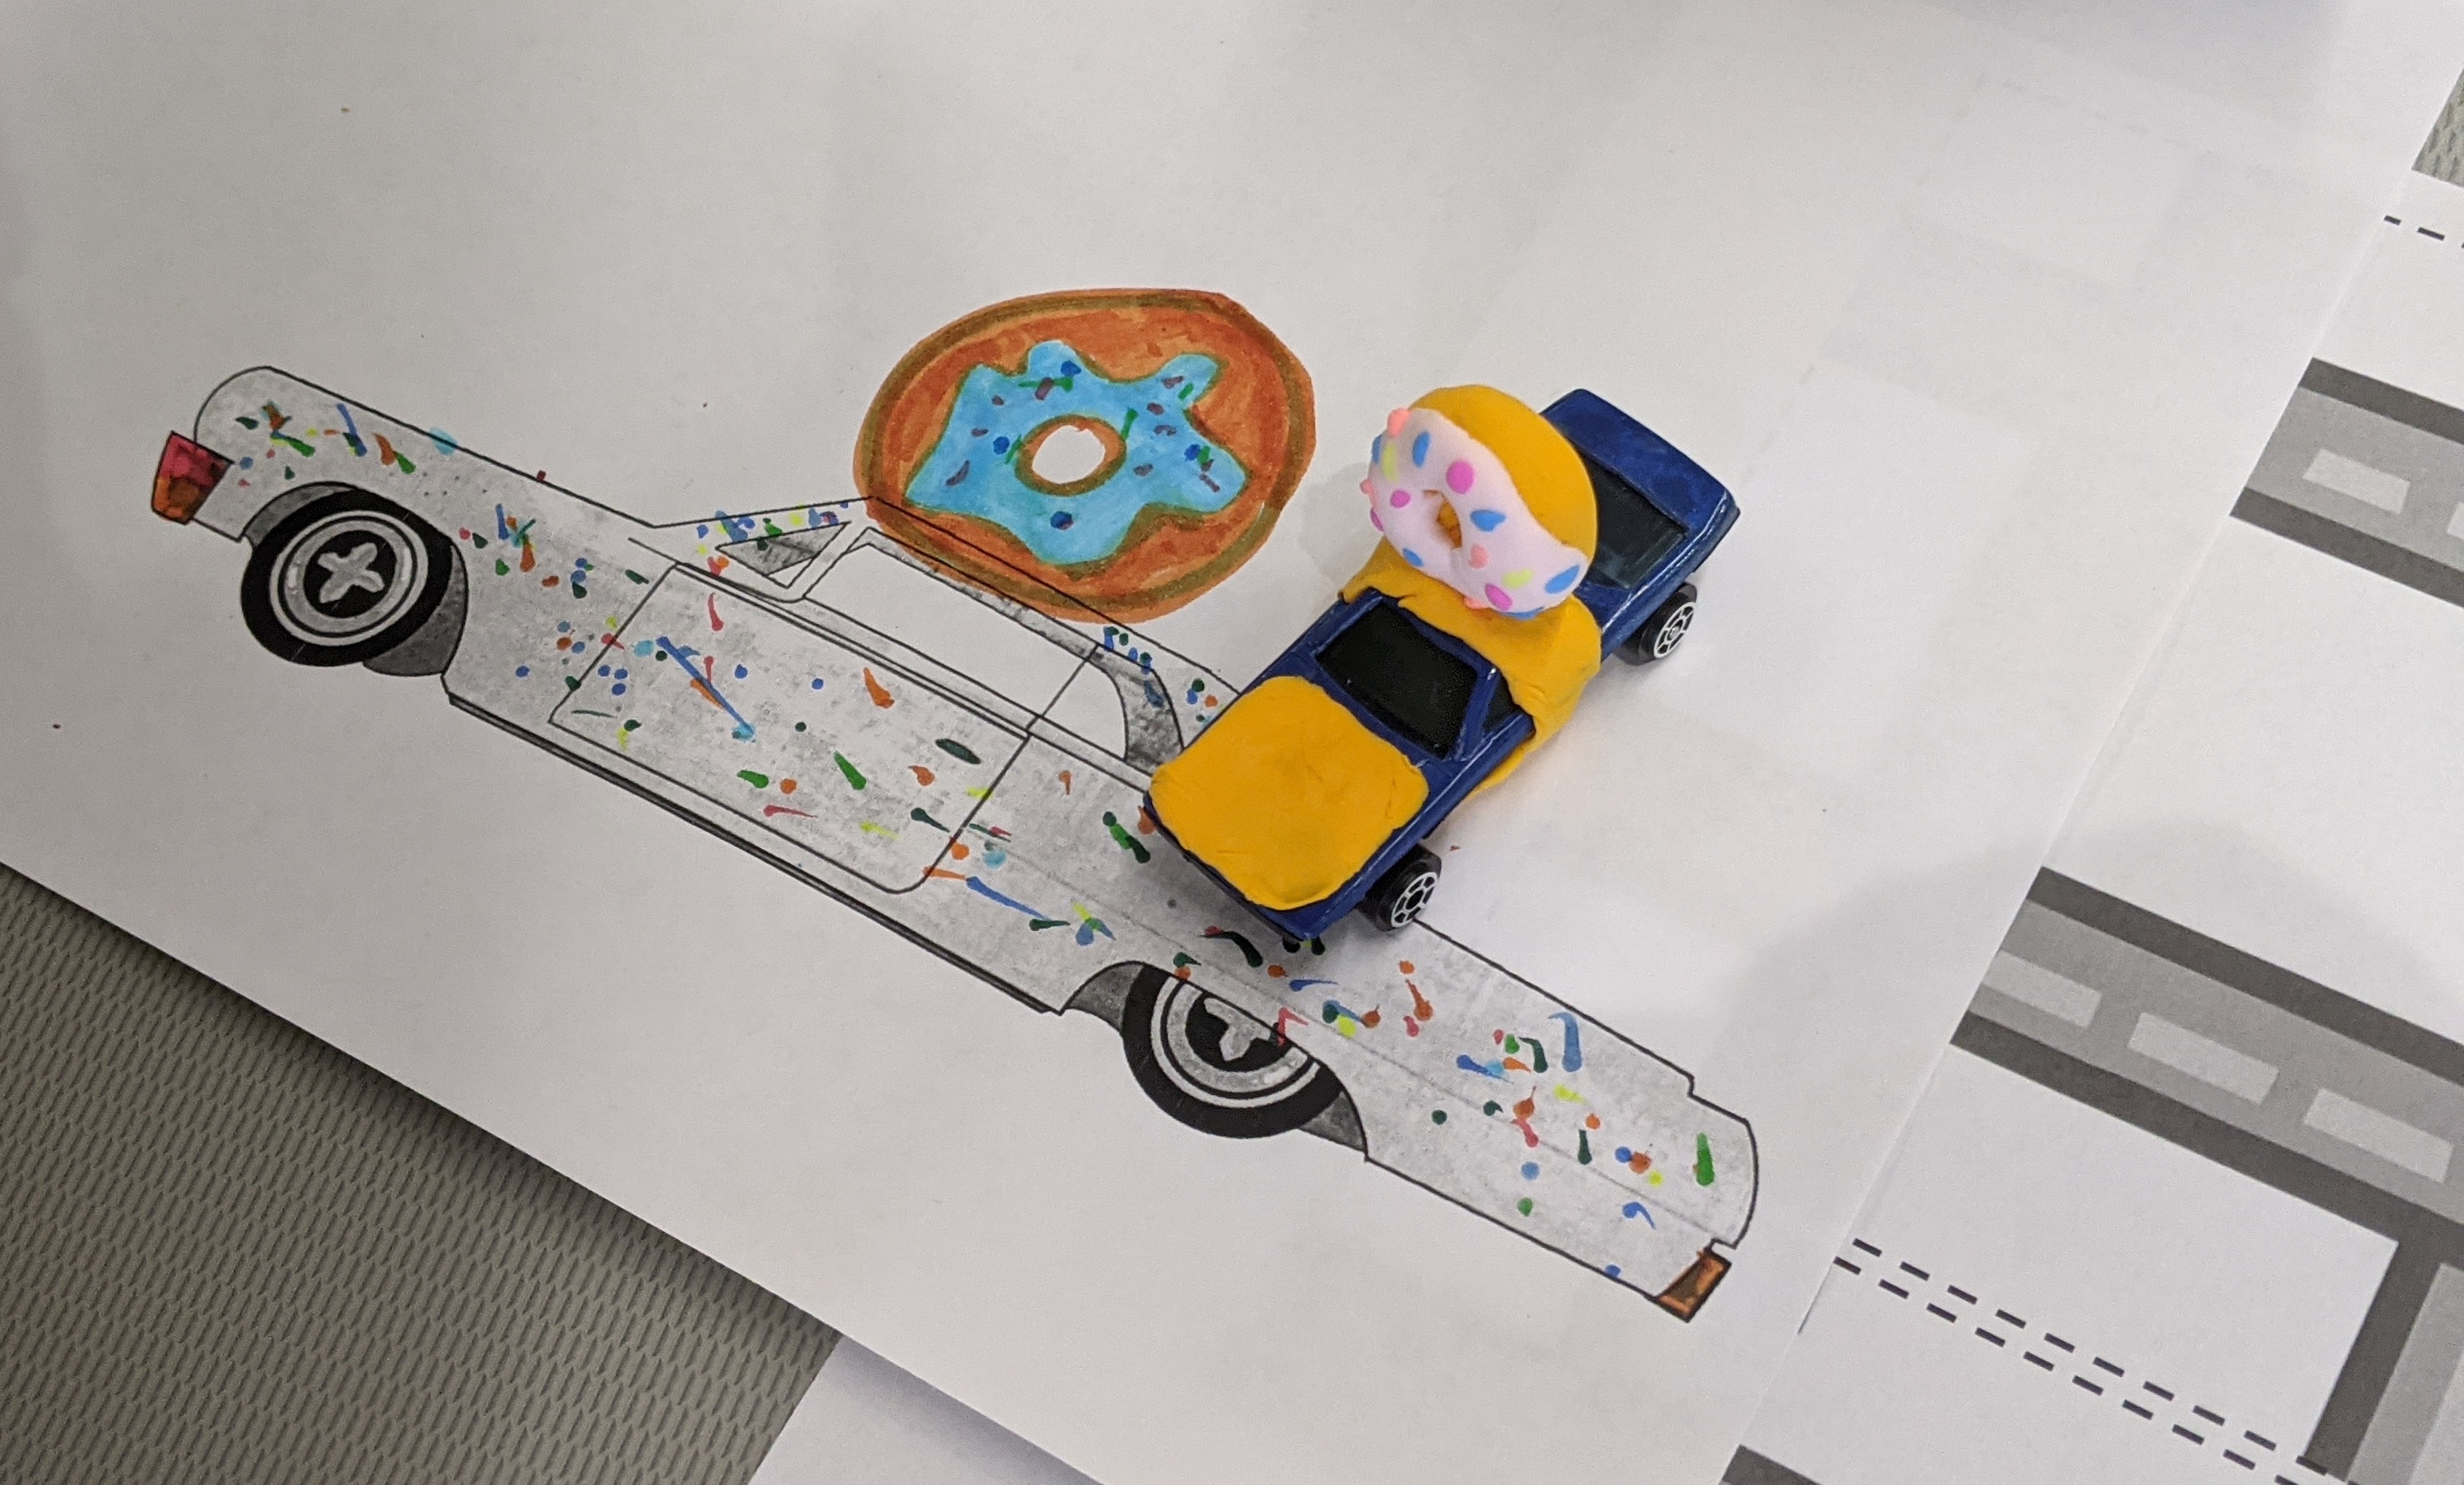 Drawing of a artistic car with a toy car decorated to look like the design.